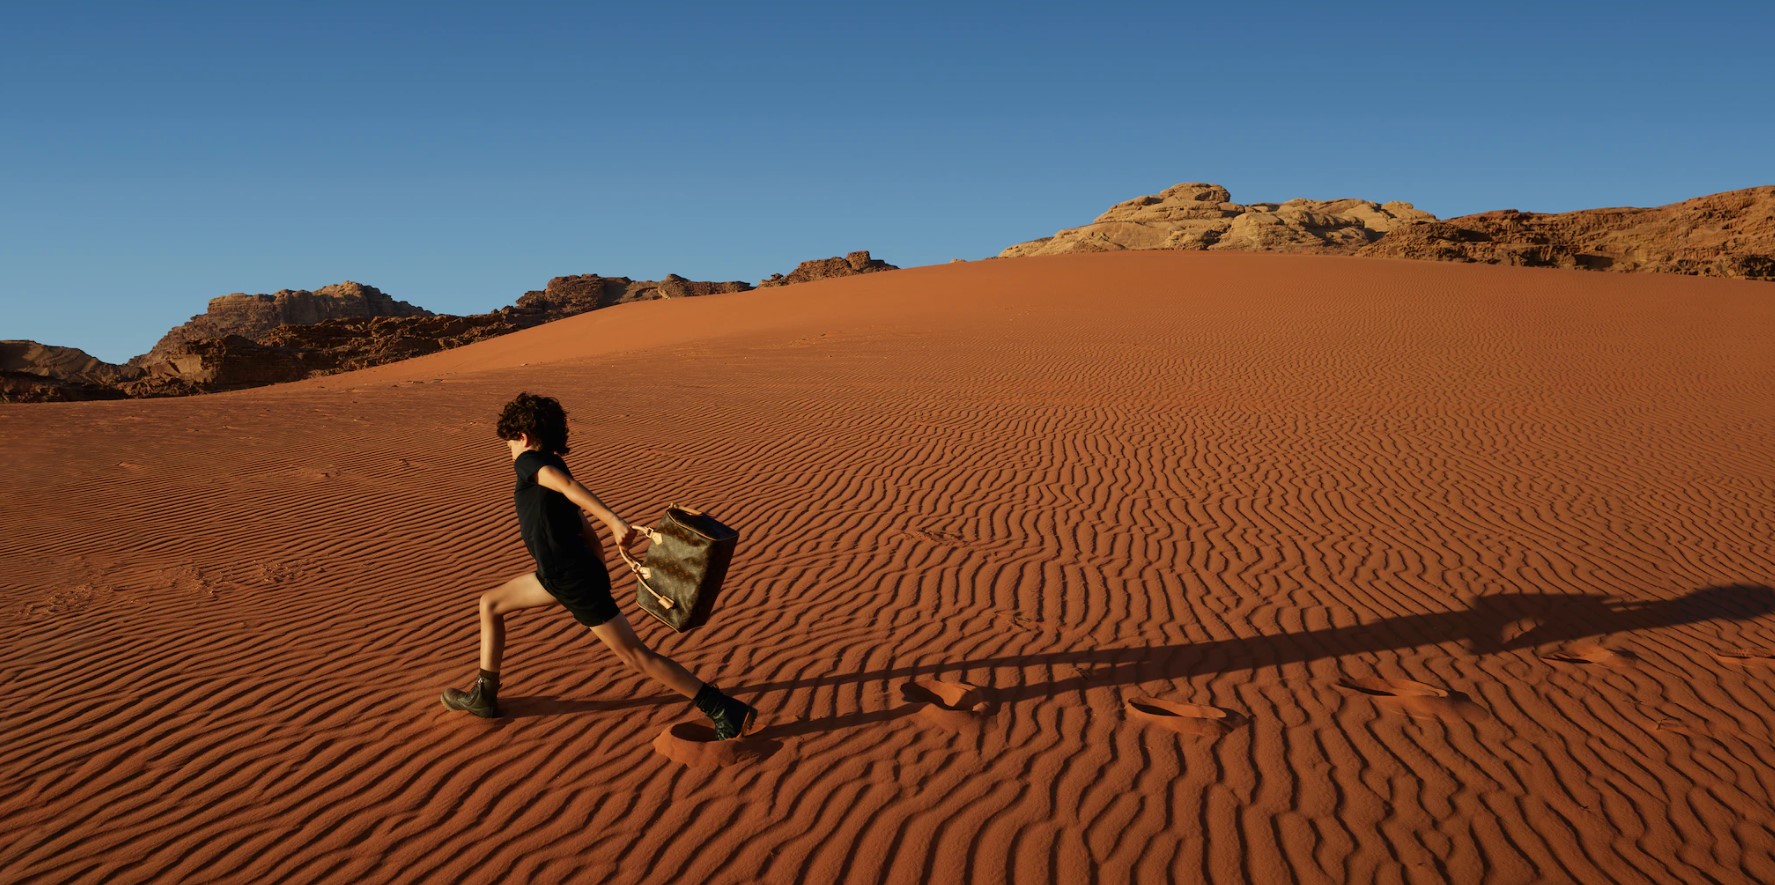 Louis Vuitton invites itself to Jordan for its new campaign - KAWA